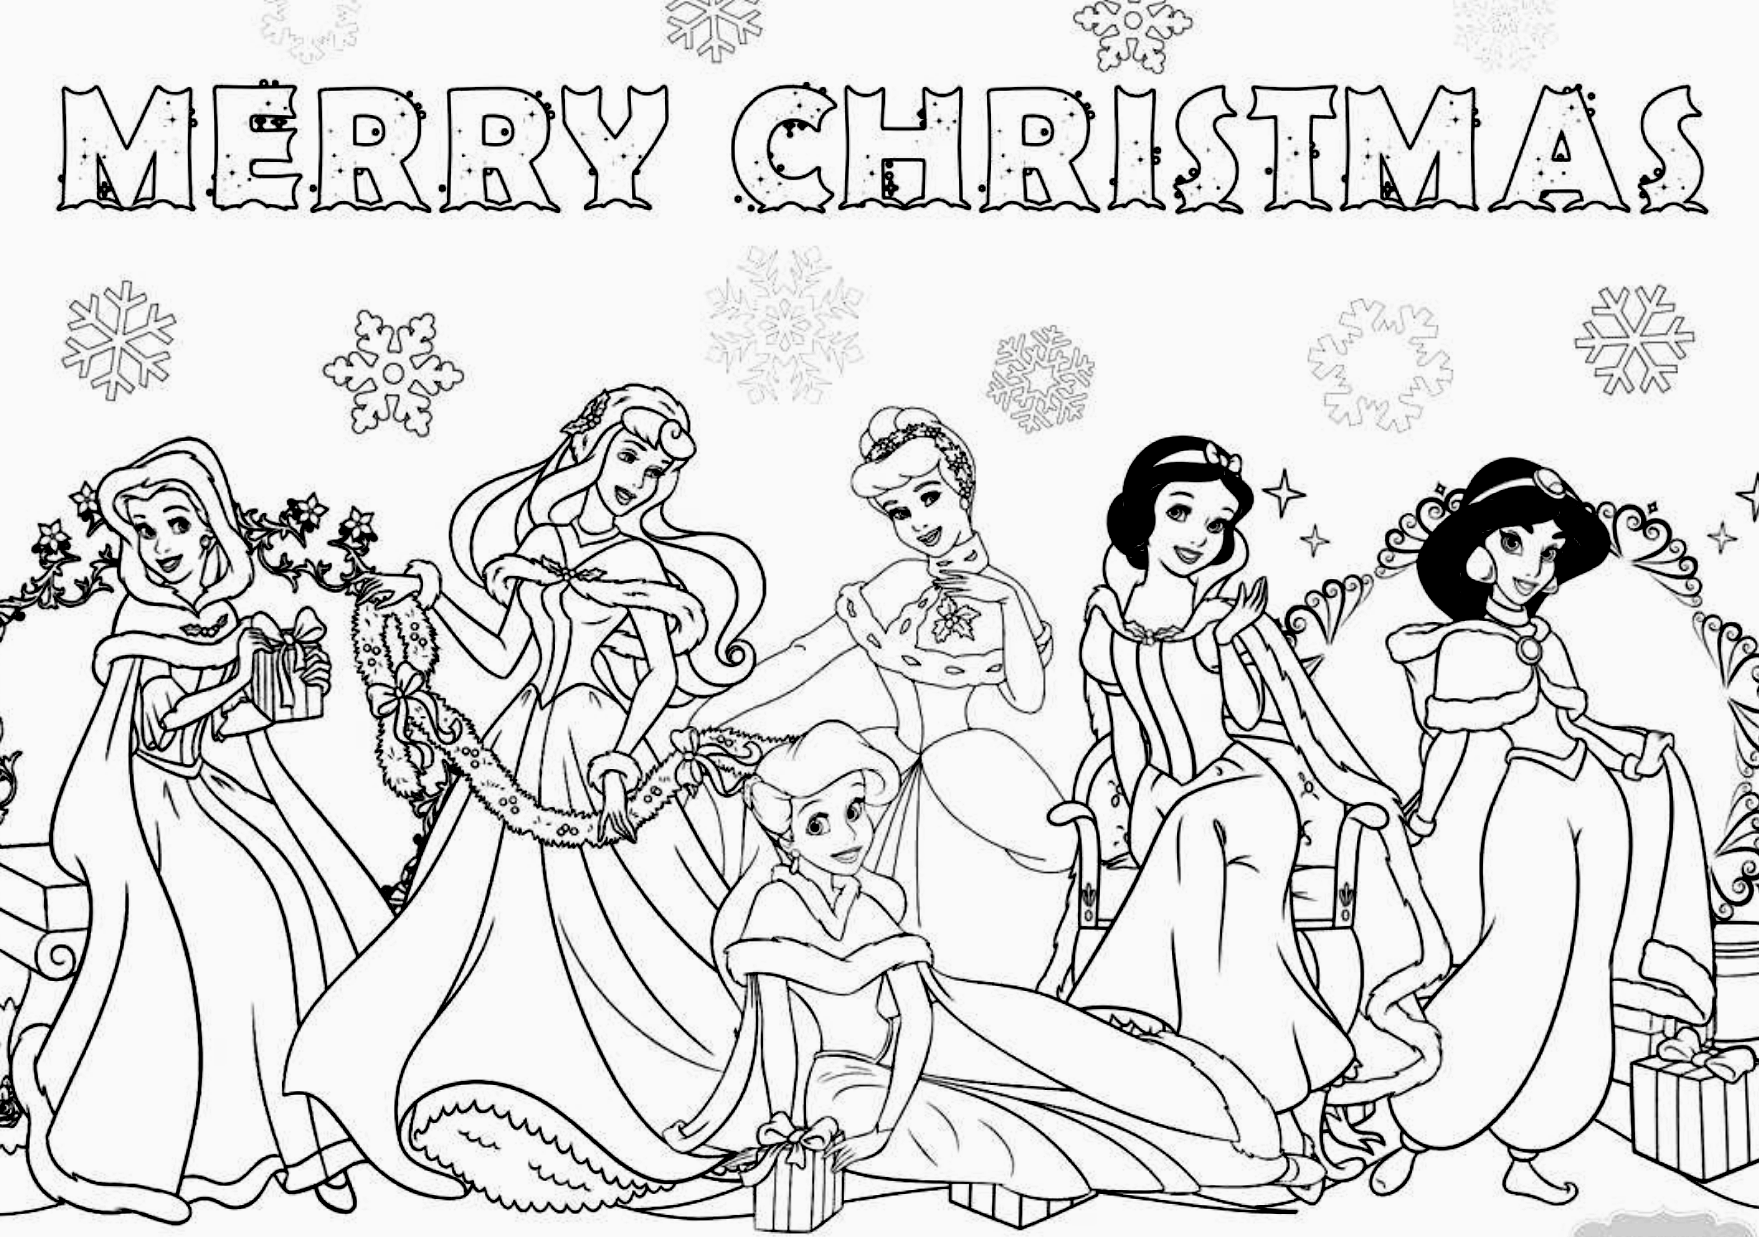 Free printable disneys princesses merry christmas coloring page collecâ princess coloring pages disney princess coloring pages merry christmas coloring pages